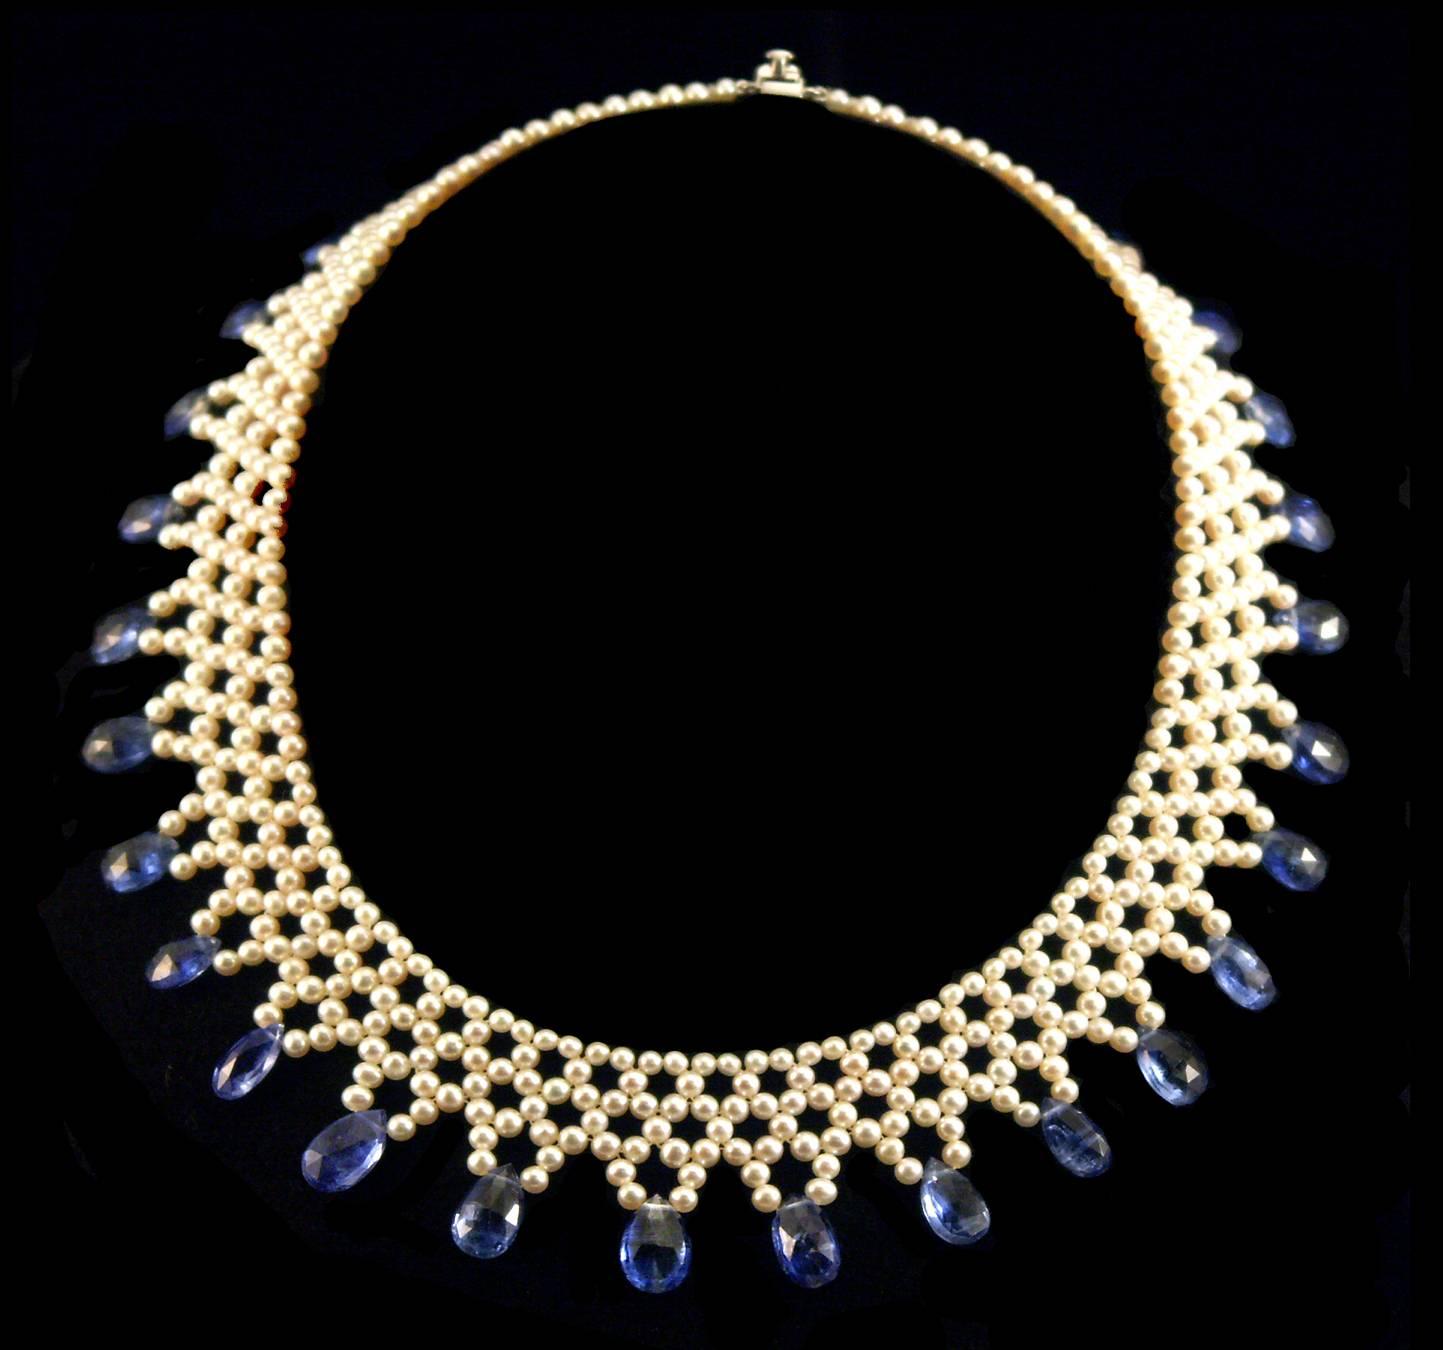 Contemporary Marina J. Woven Pearl Necklace with Kyanite Brioletts and 14K Yellow Gold Clasp